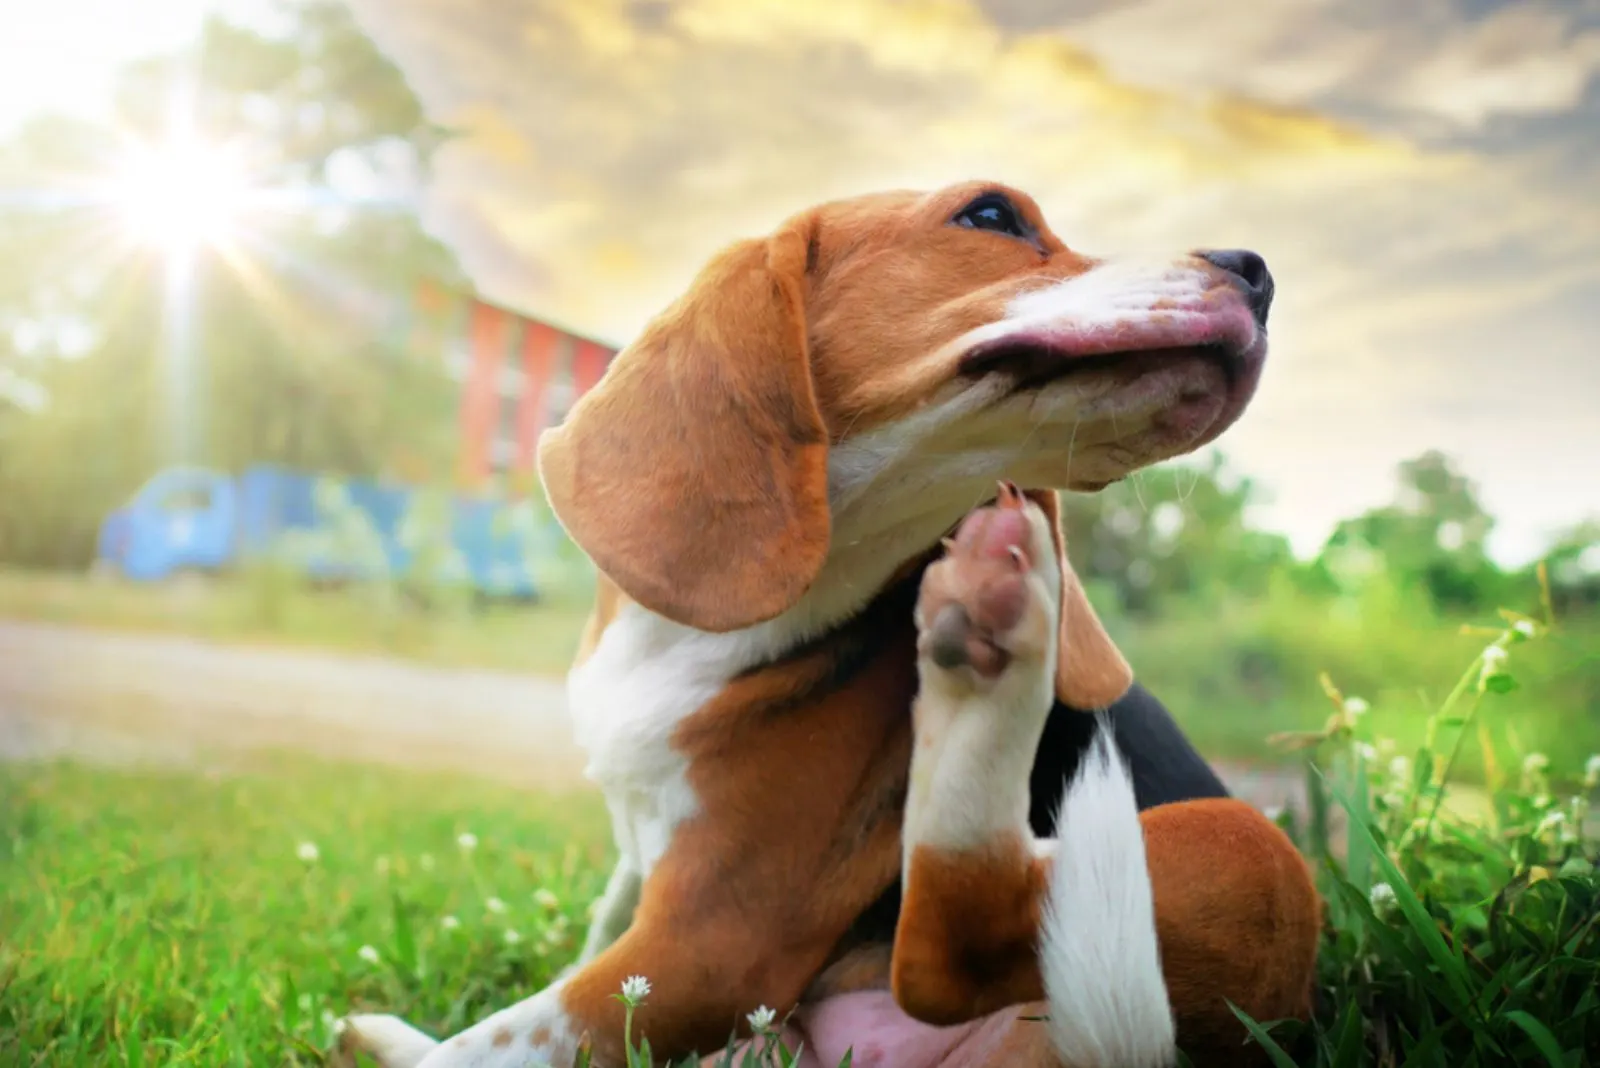 beagle dog scratching his neck while sitting in the grass